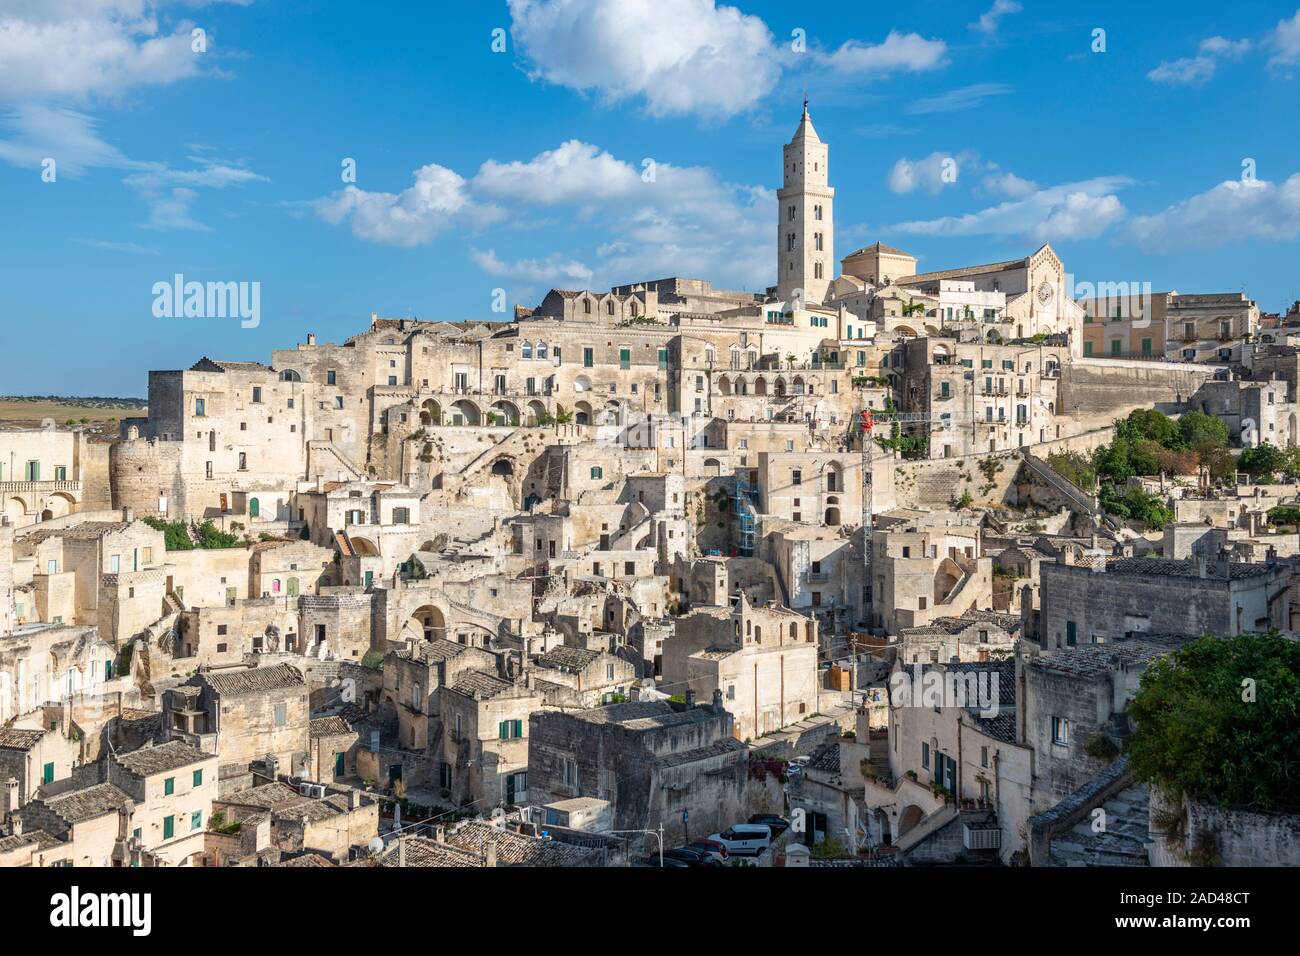 General view across Sasso Barisano with cathedral tower in distance - Sassi District of Matera, Basilicata Region, Southern Italy Stock Photo